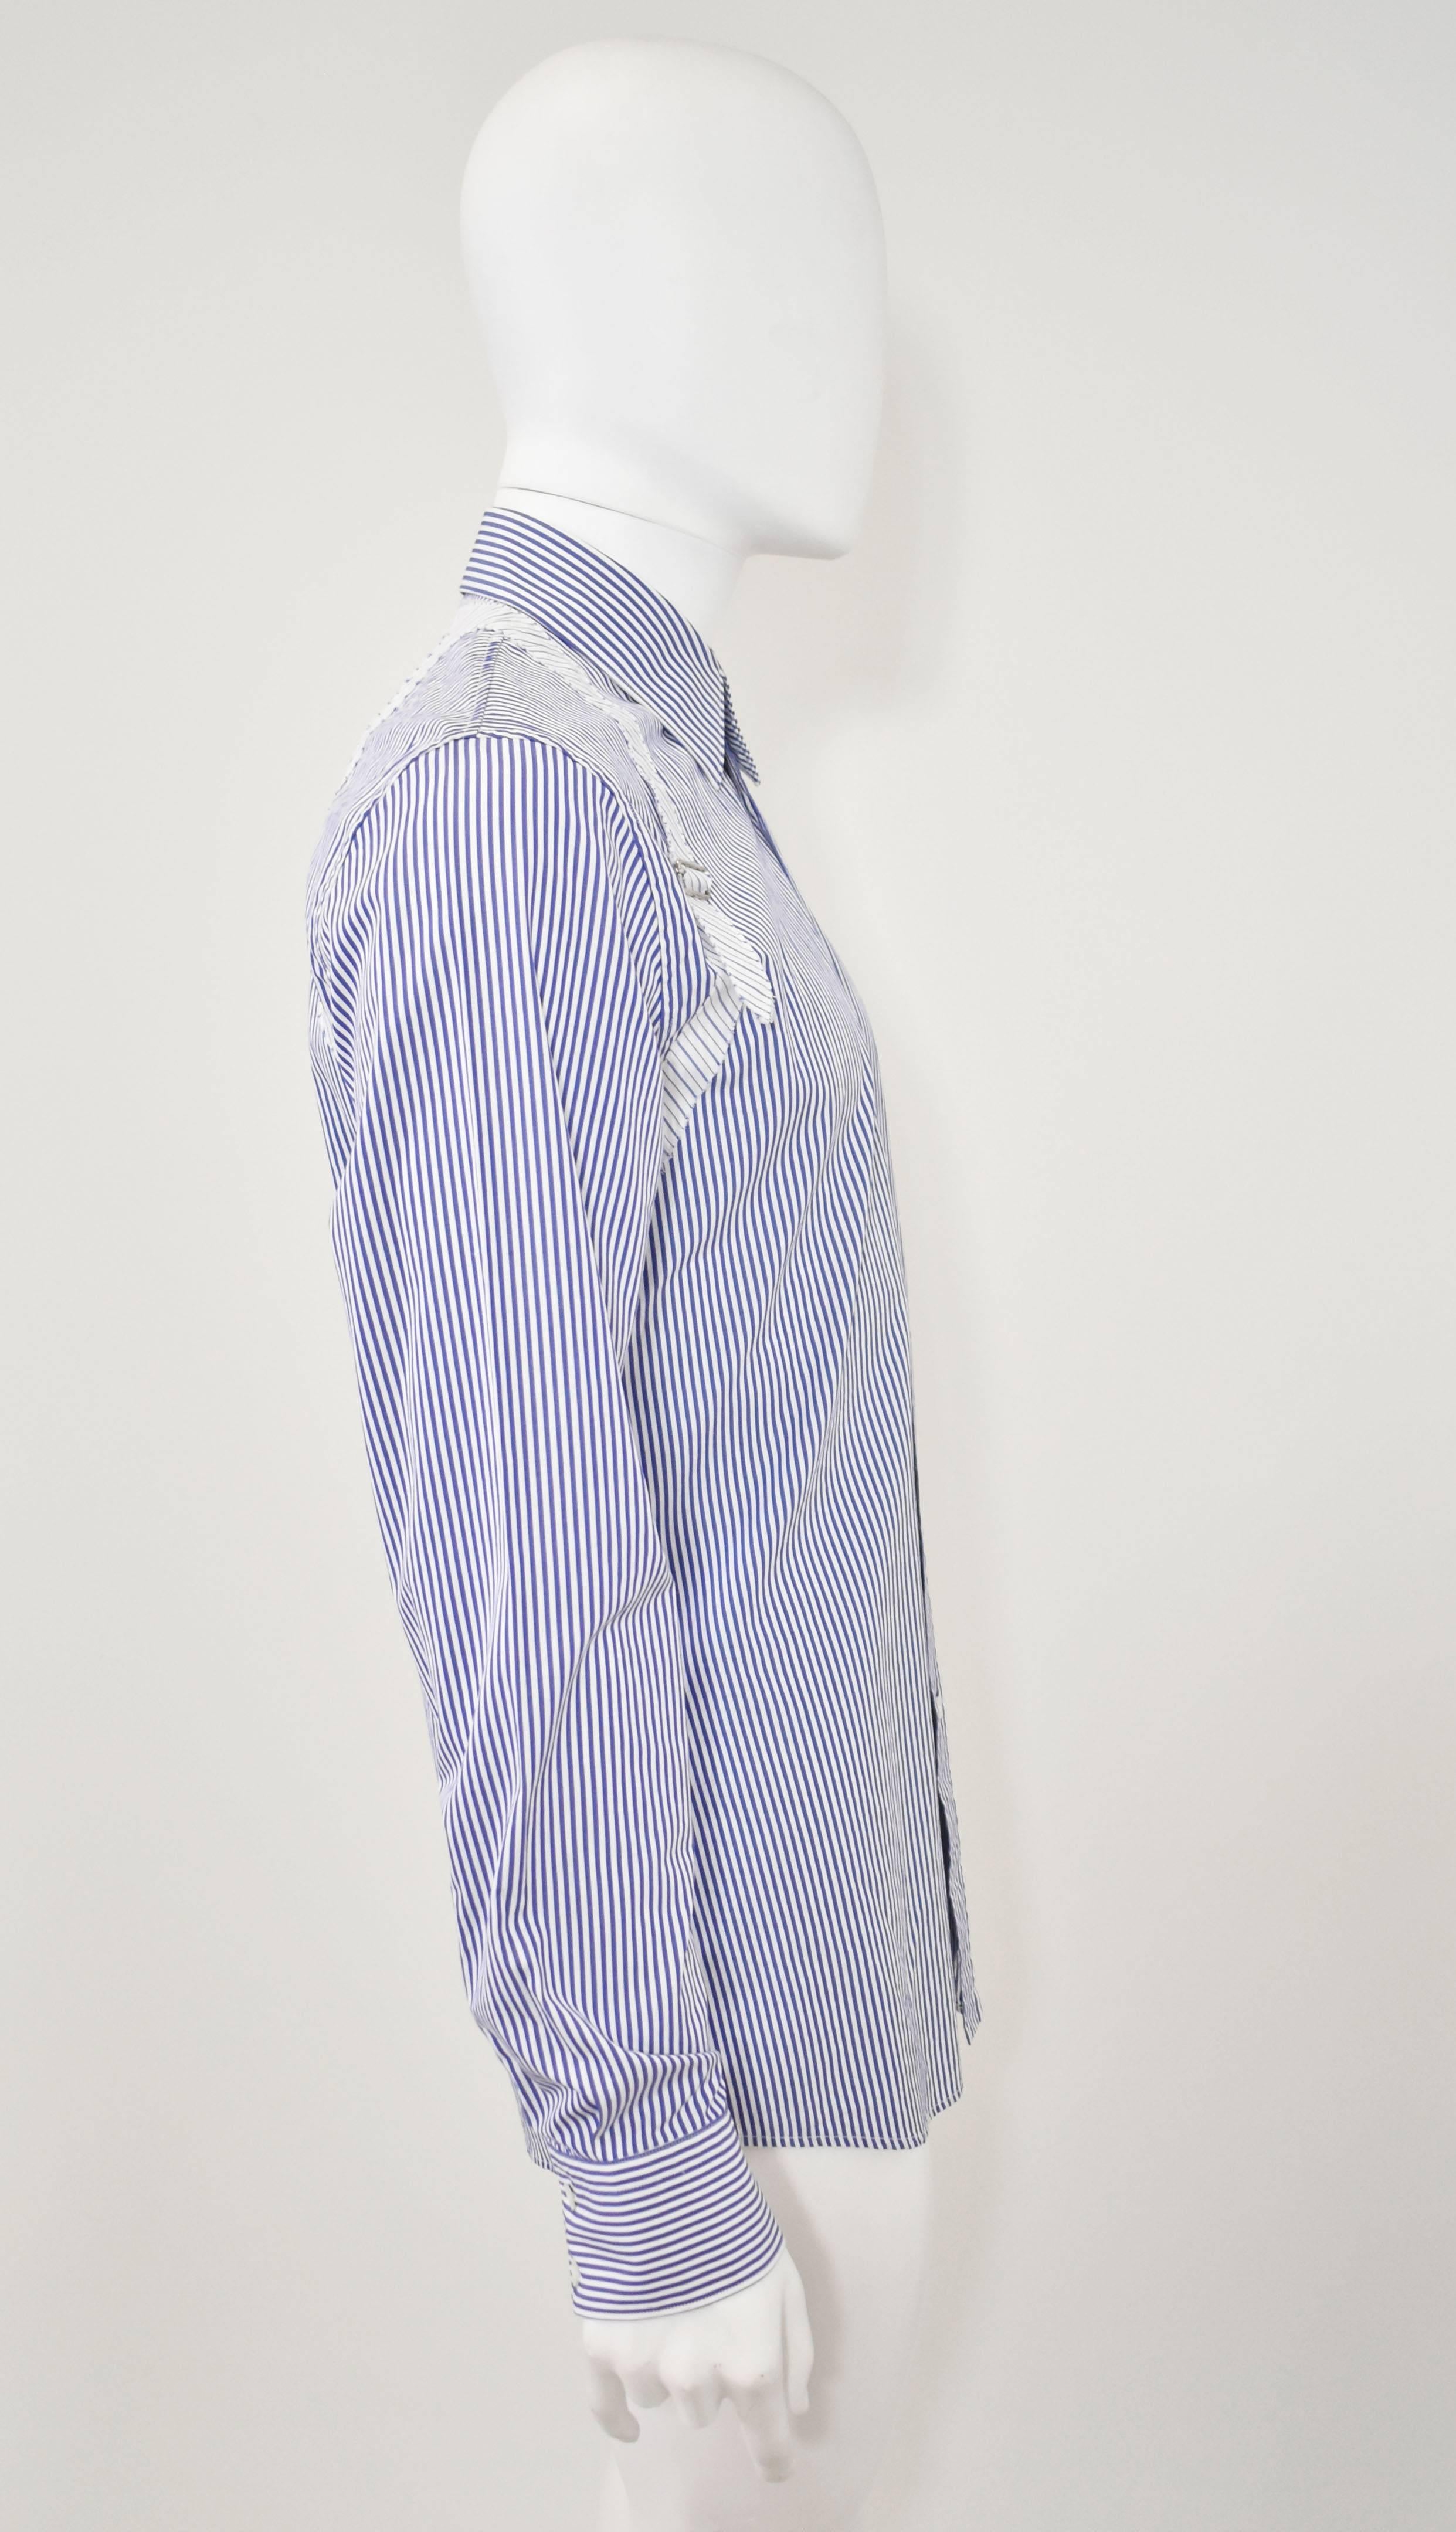 Gray Alexander McQueen White & Blue Stripe Shirt with Harness Press Sample A/W 2015